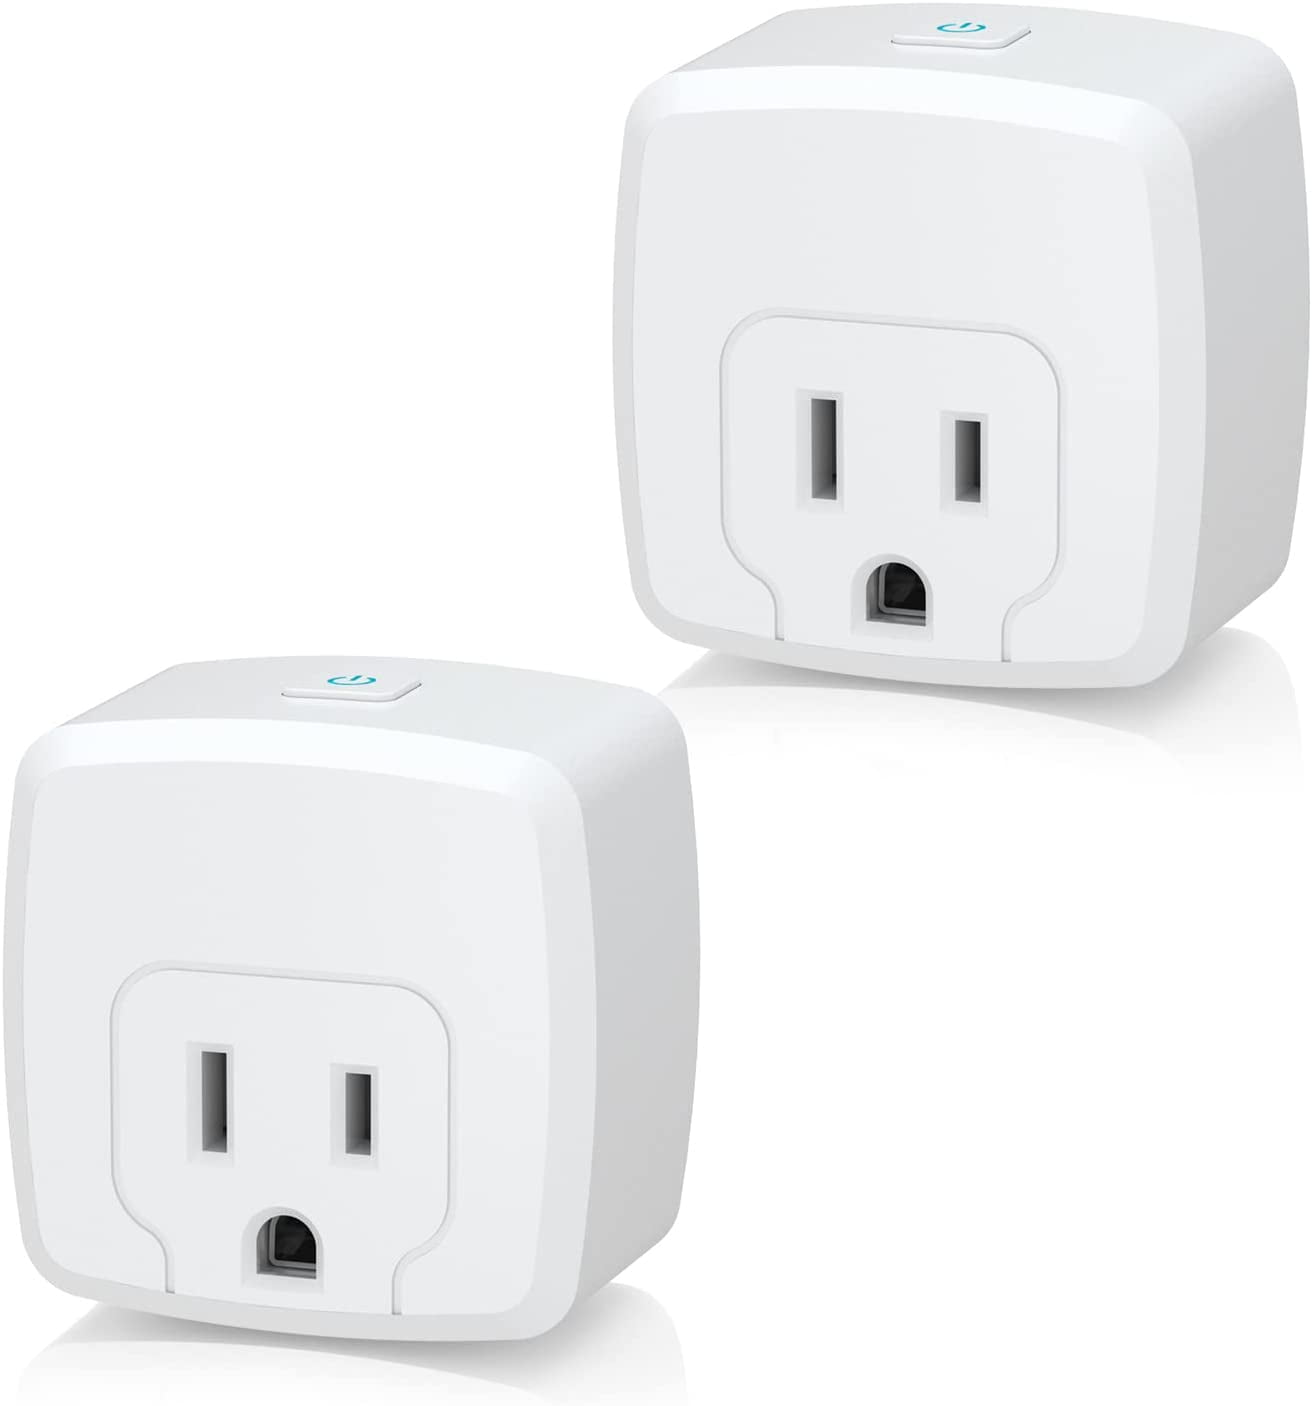 HBN 2 Pack Outdoor Smart Plug Wi-Fi Outlet Works with Alexa